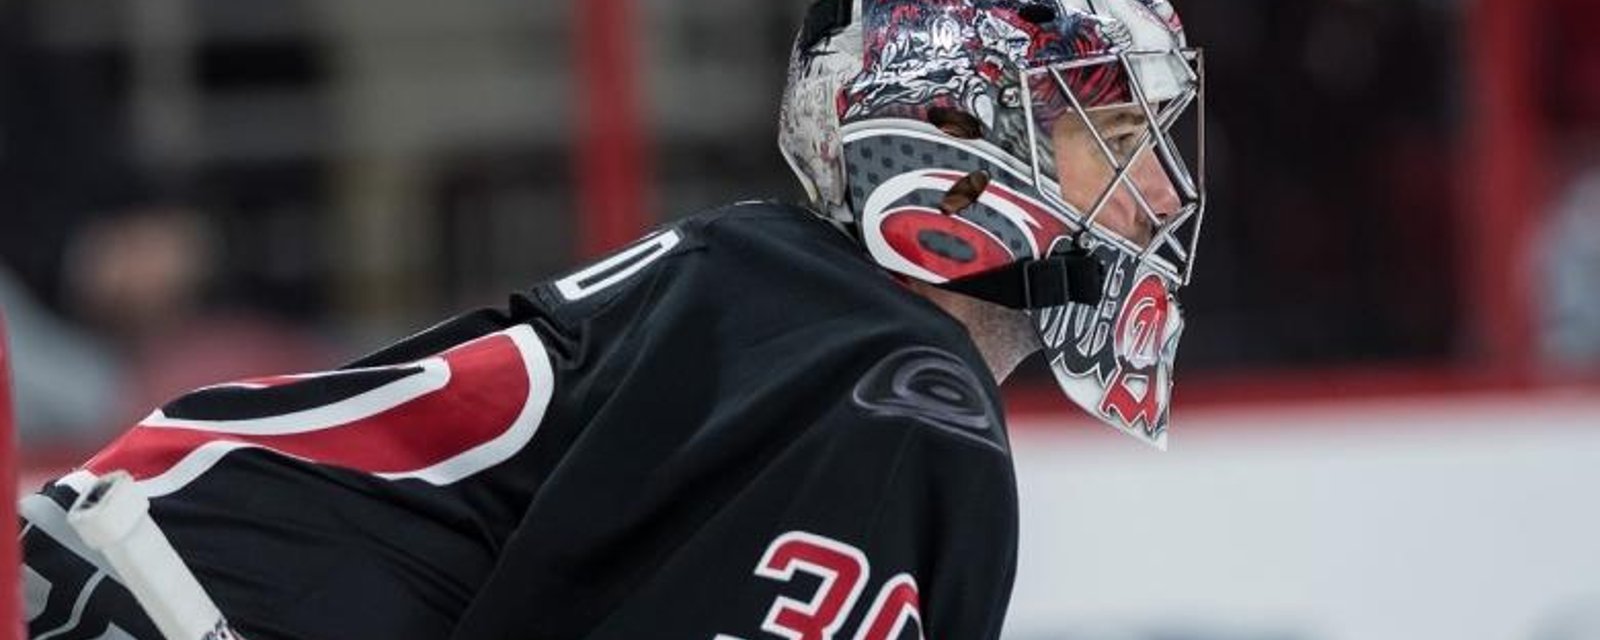 Report: Cam Ward has signed a new contract with the Hurricanes.